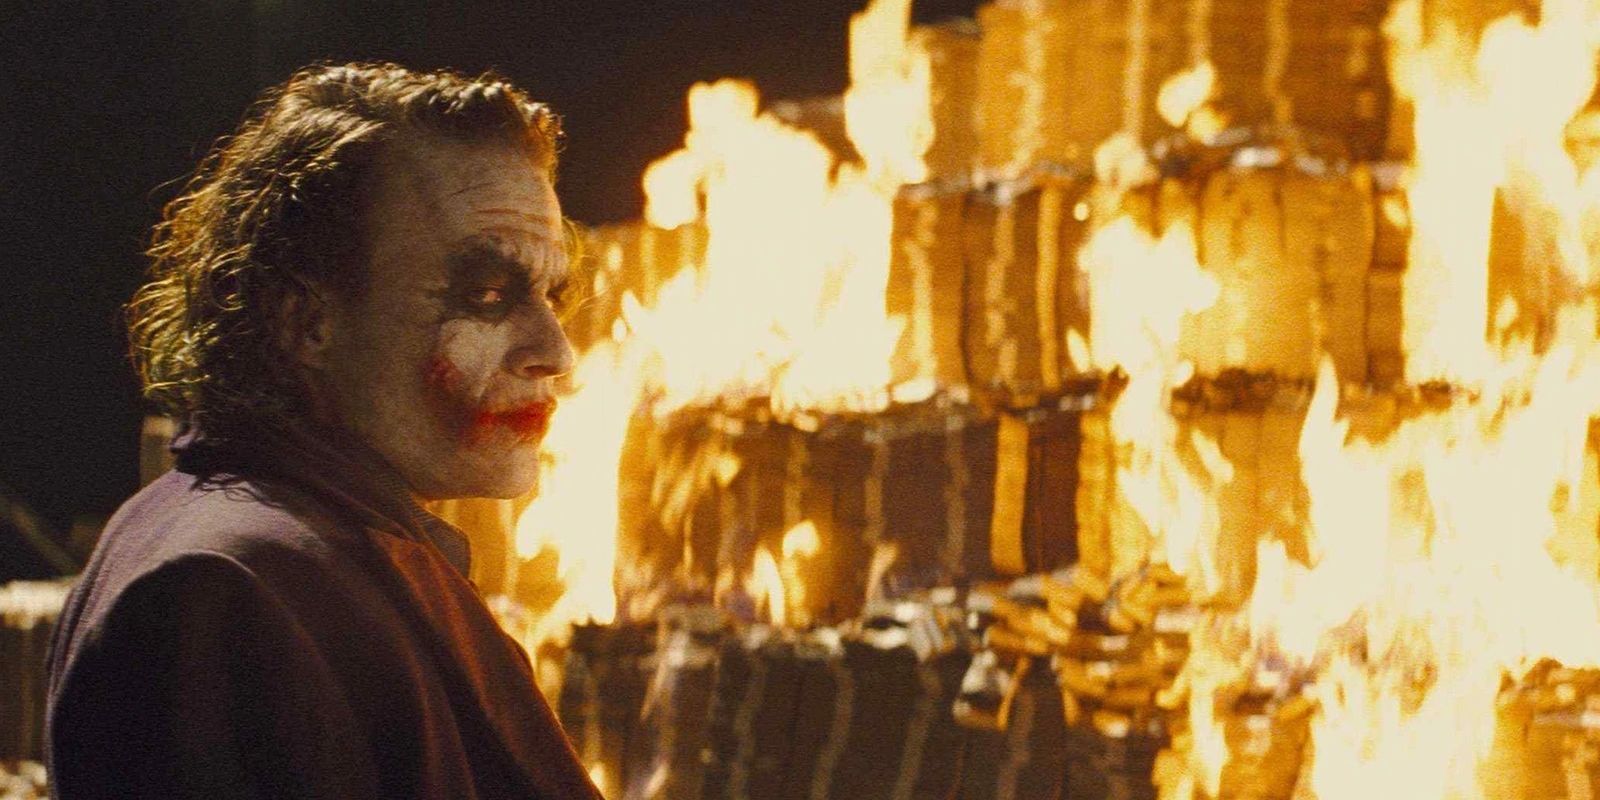 Heath Ledger as Joker standing in front of a burning pile of money in The Dark Knight.